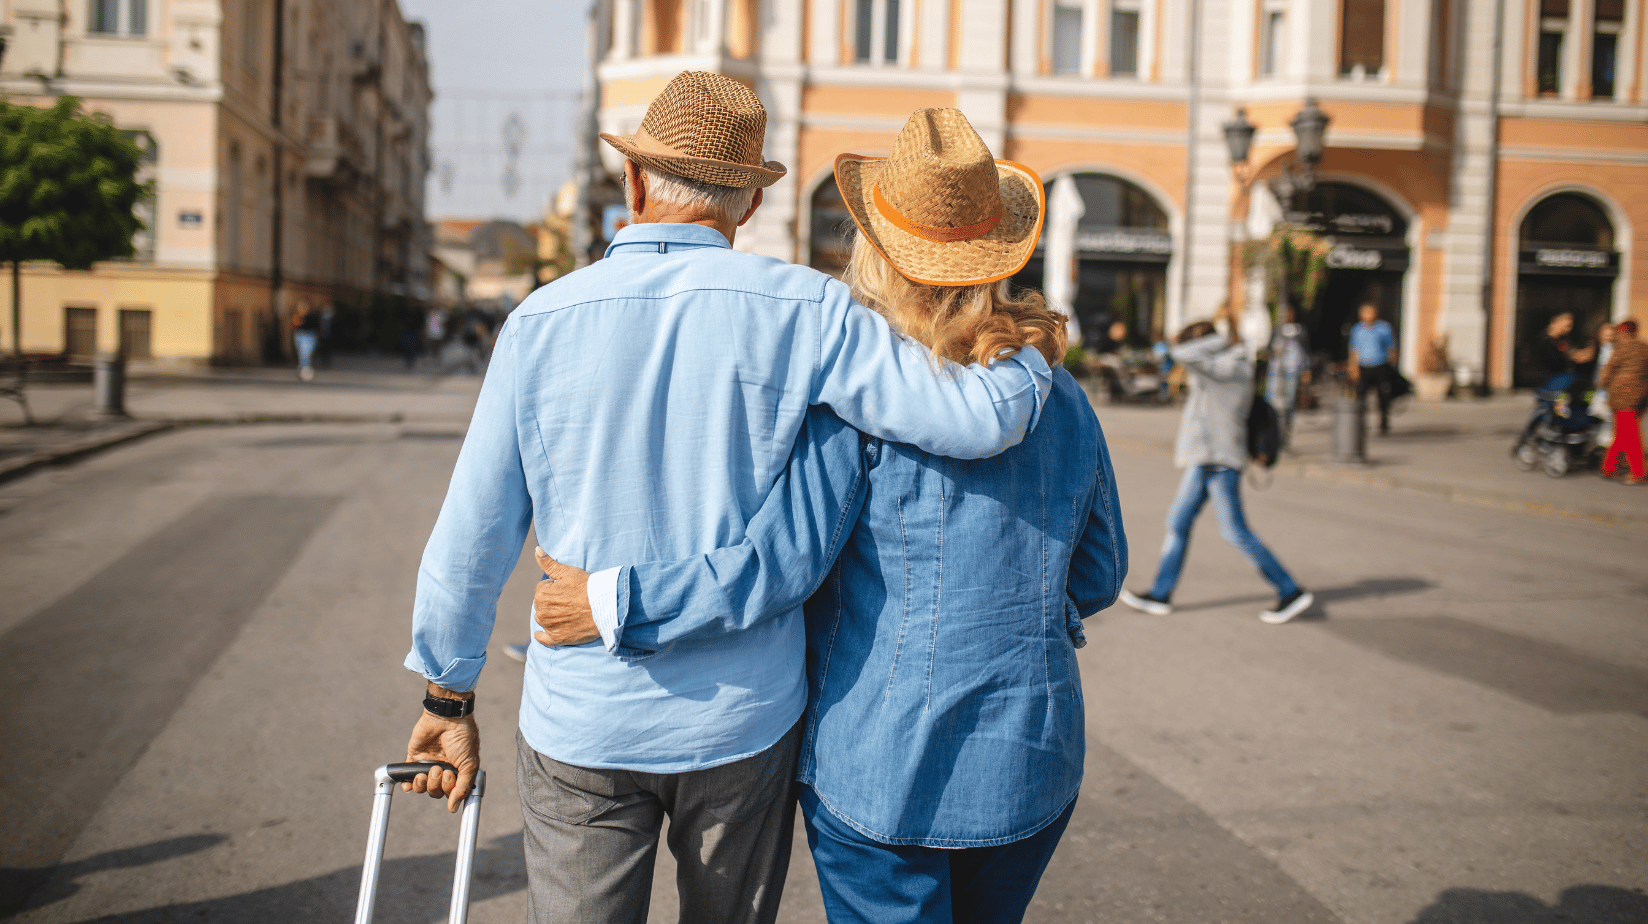 Travel Insurance for Senior Citizens: What You Should Know